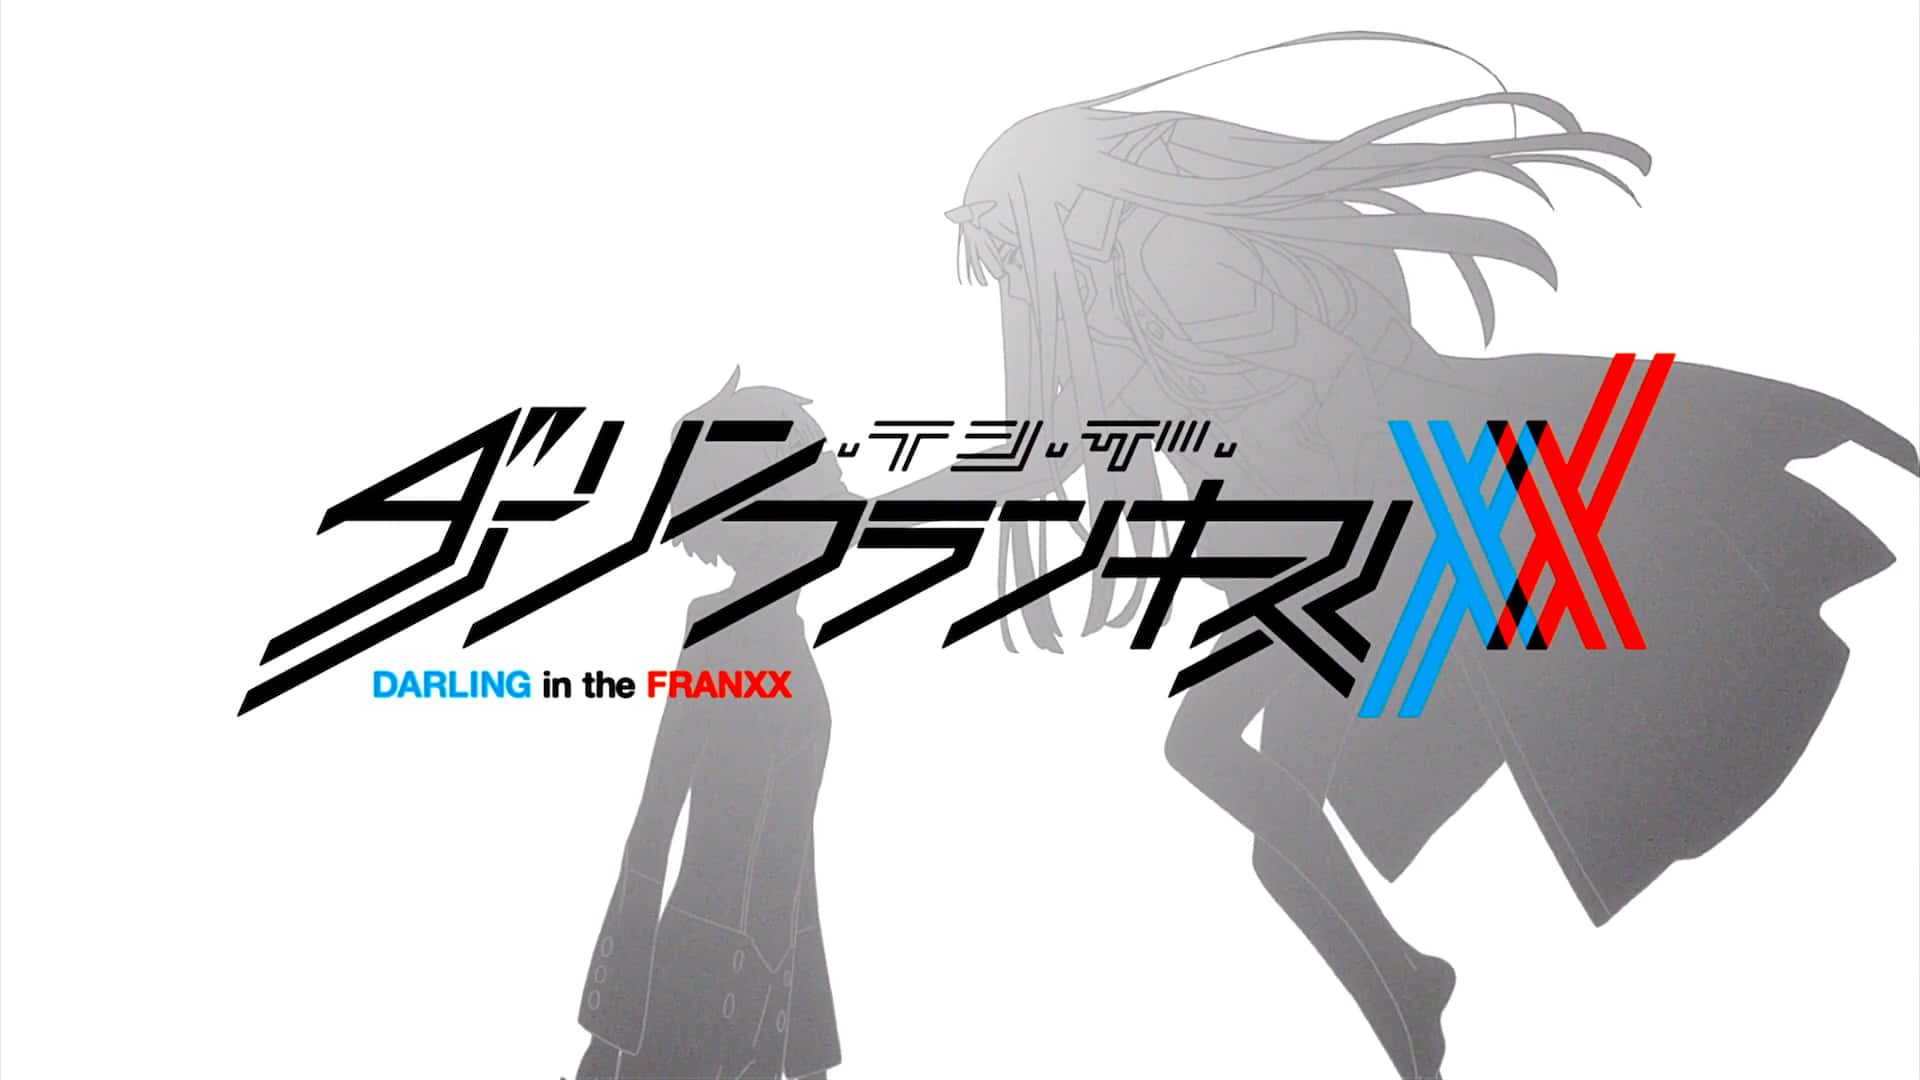 "A team of brave pilots soar into the unknown in the world of Darling In The Franxx."